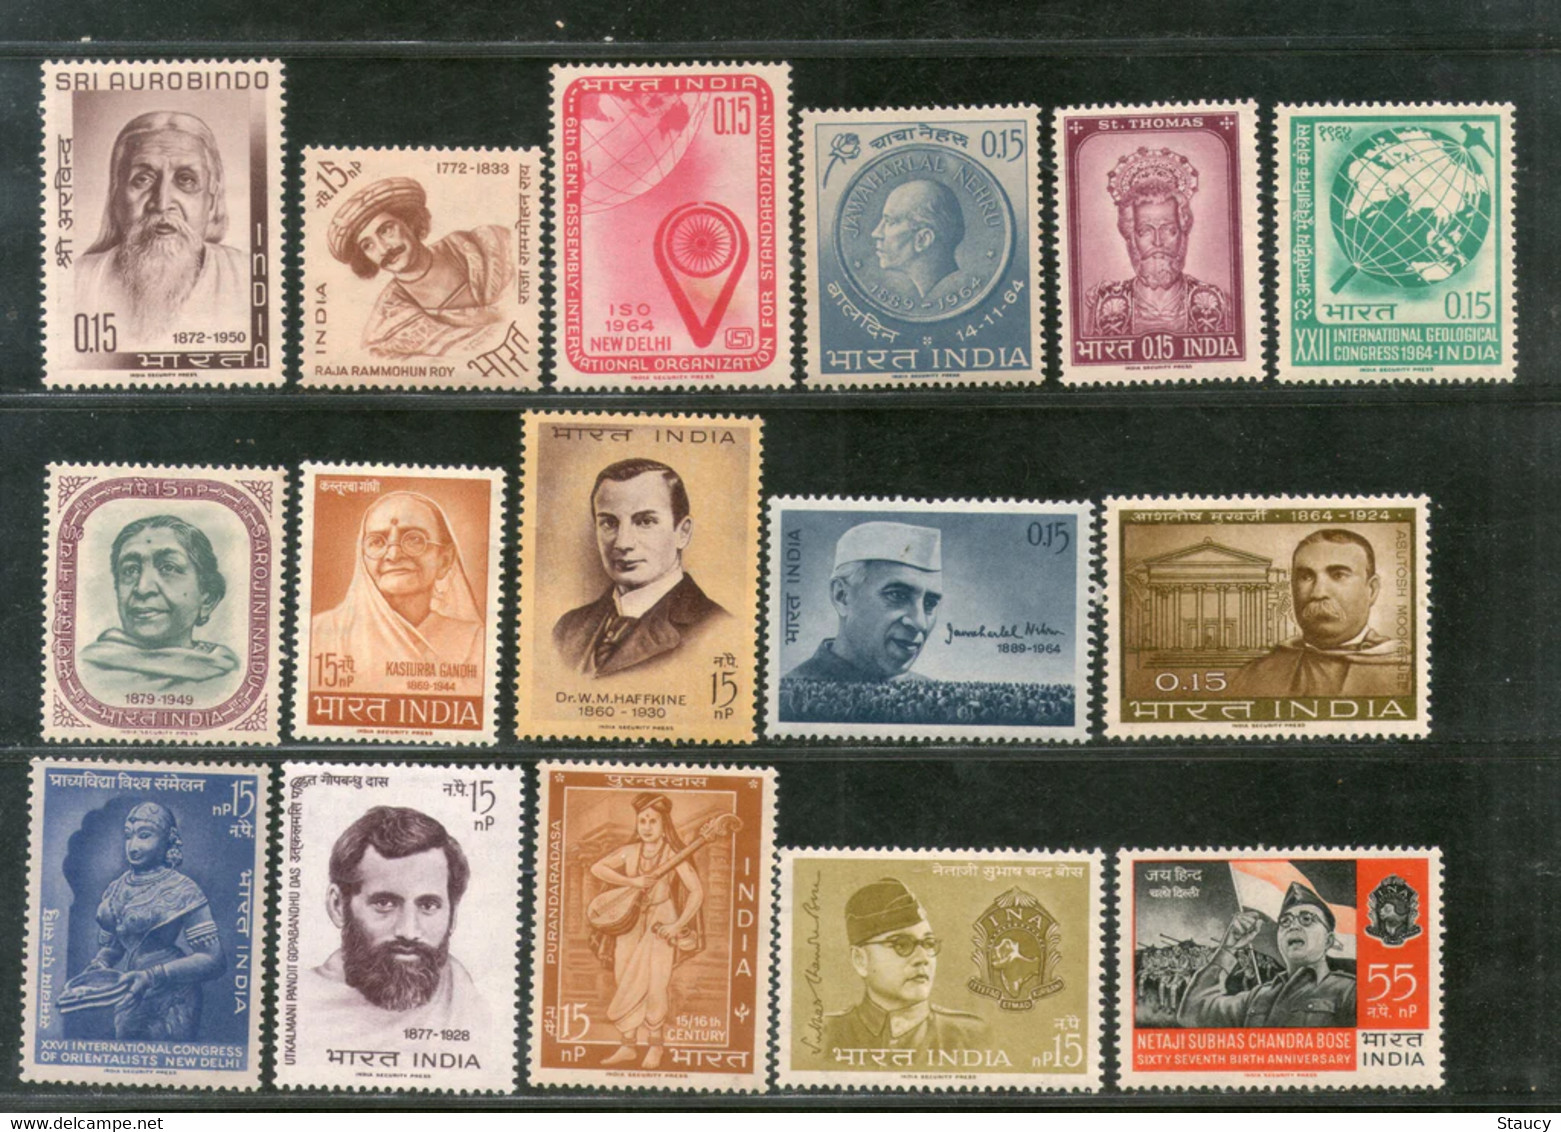 India 1964 Complete Year Pack / Set / Collection Total 16 Stamps (No Missing) MNH As Per Scan - Años Completos